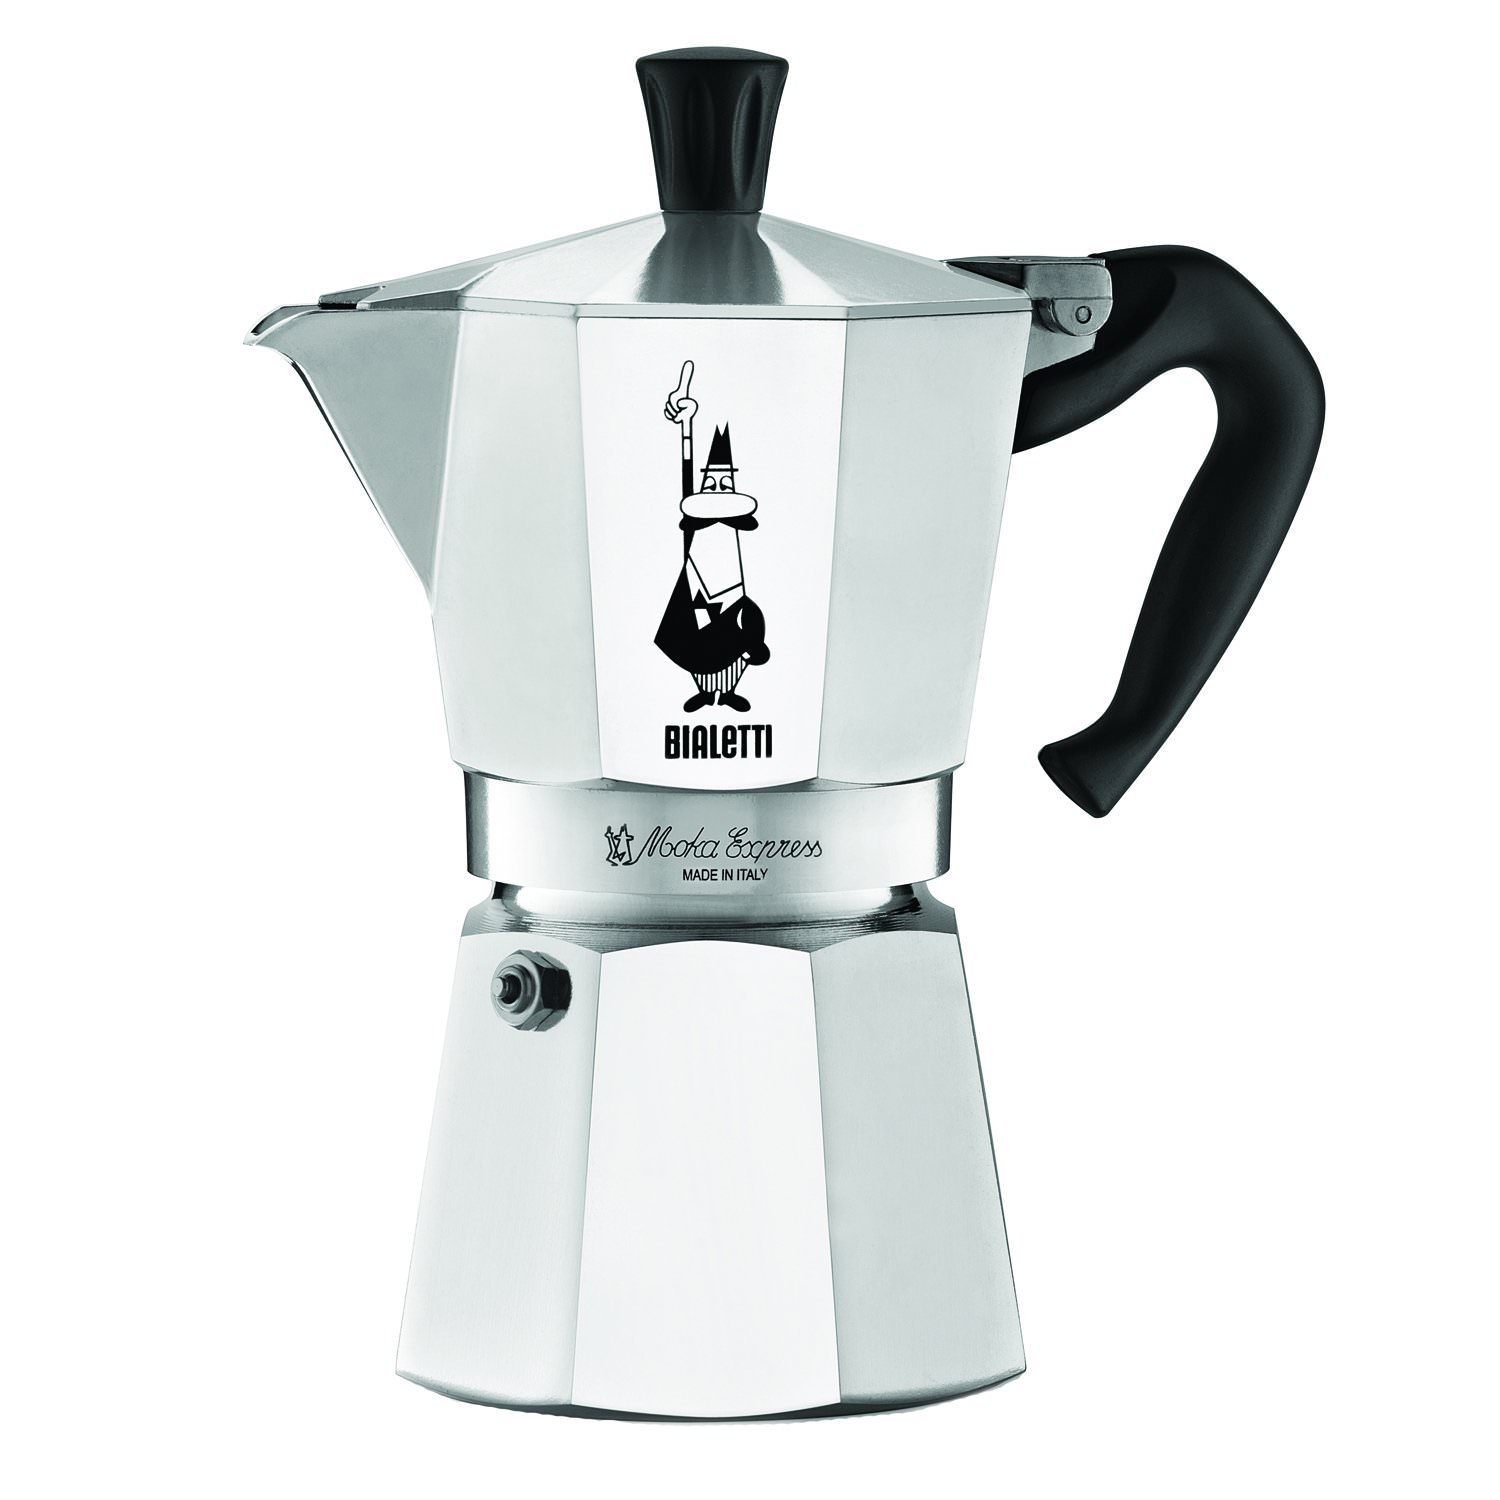 Bialetti Aluminum 6 Cup Stovetop Steamer Espresso Coffee Maker Brewer, Silver - image 1 of 7